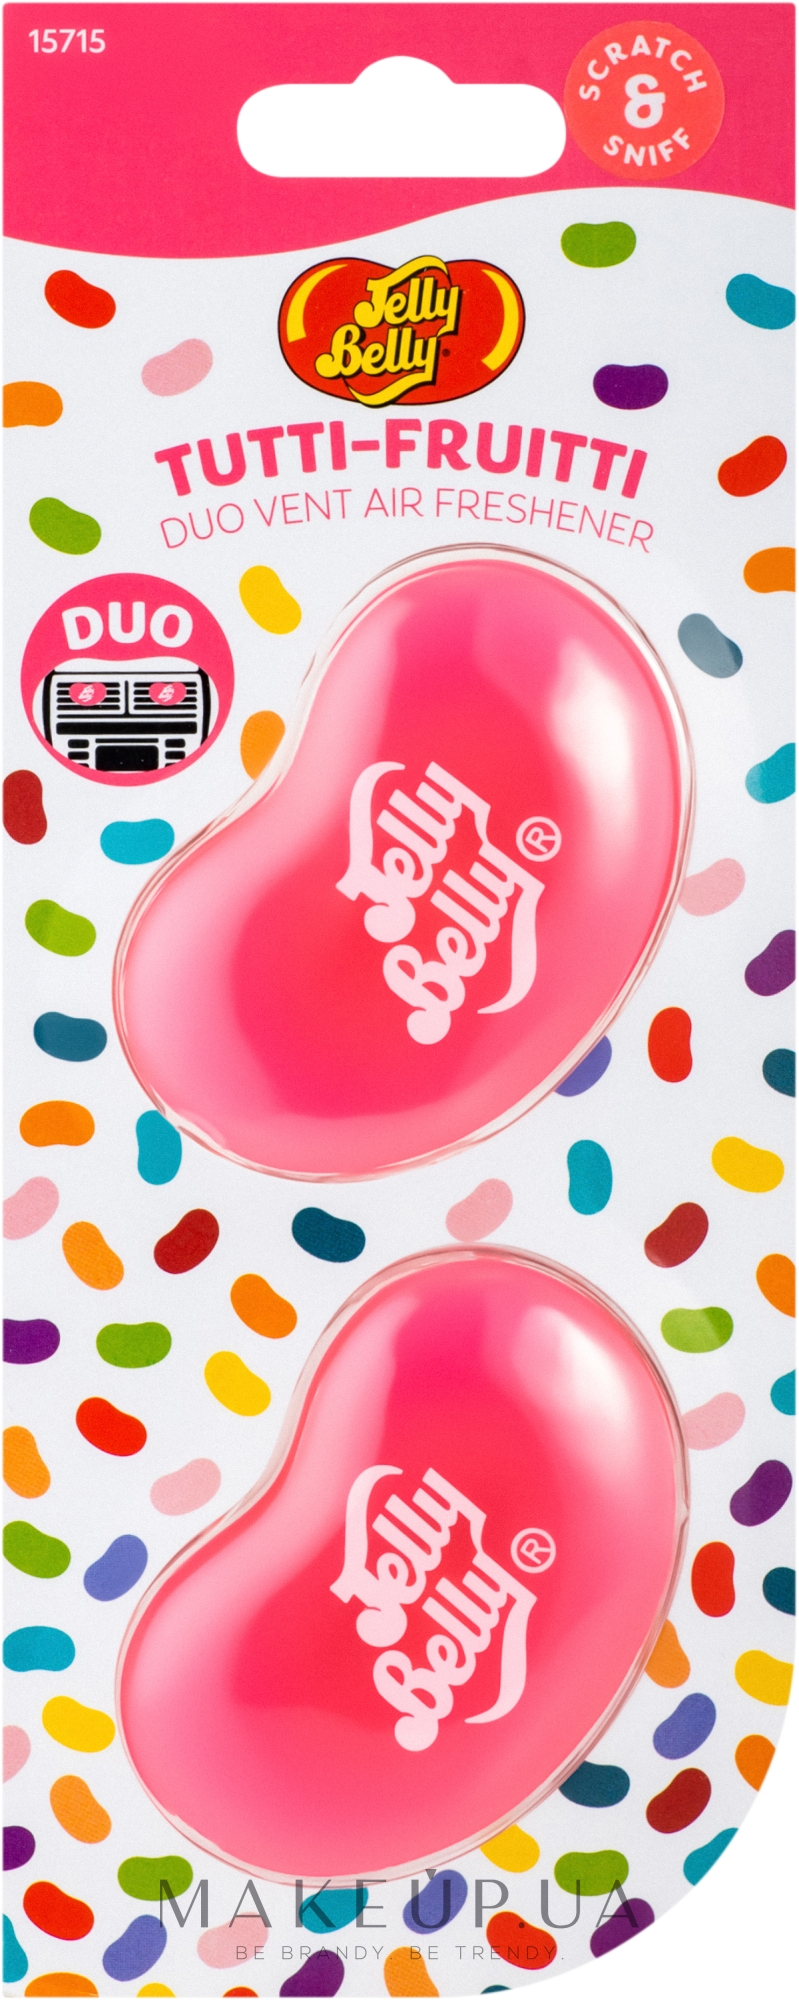 Jelly air x. Ароматизатор Джелли Белли. Ароматизатор в машину Jelly belly. Гель Bloom Bubble Gum. Bubble Gum Pack.